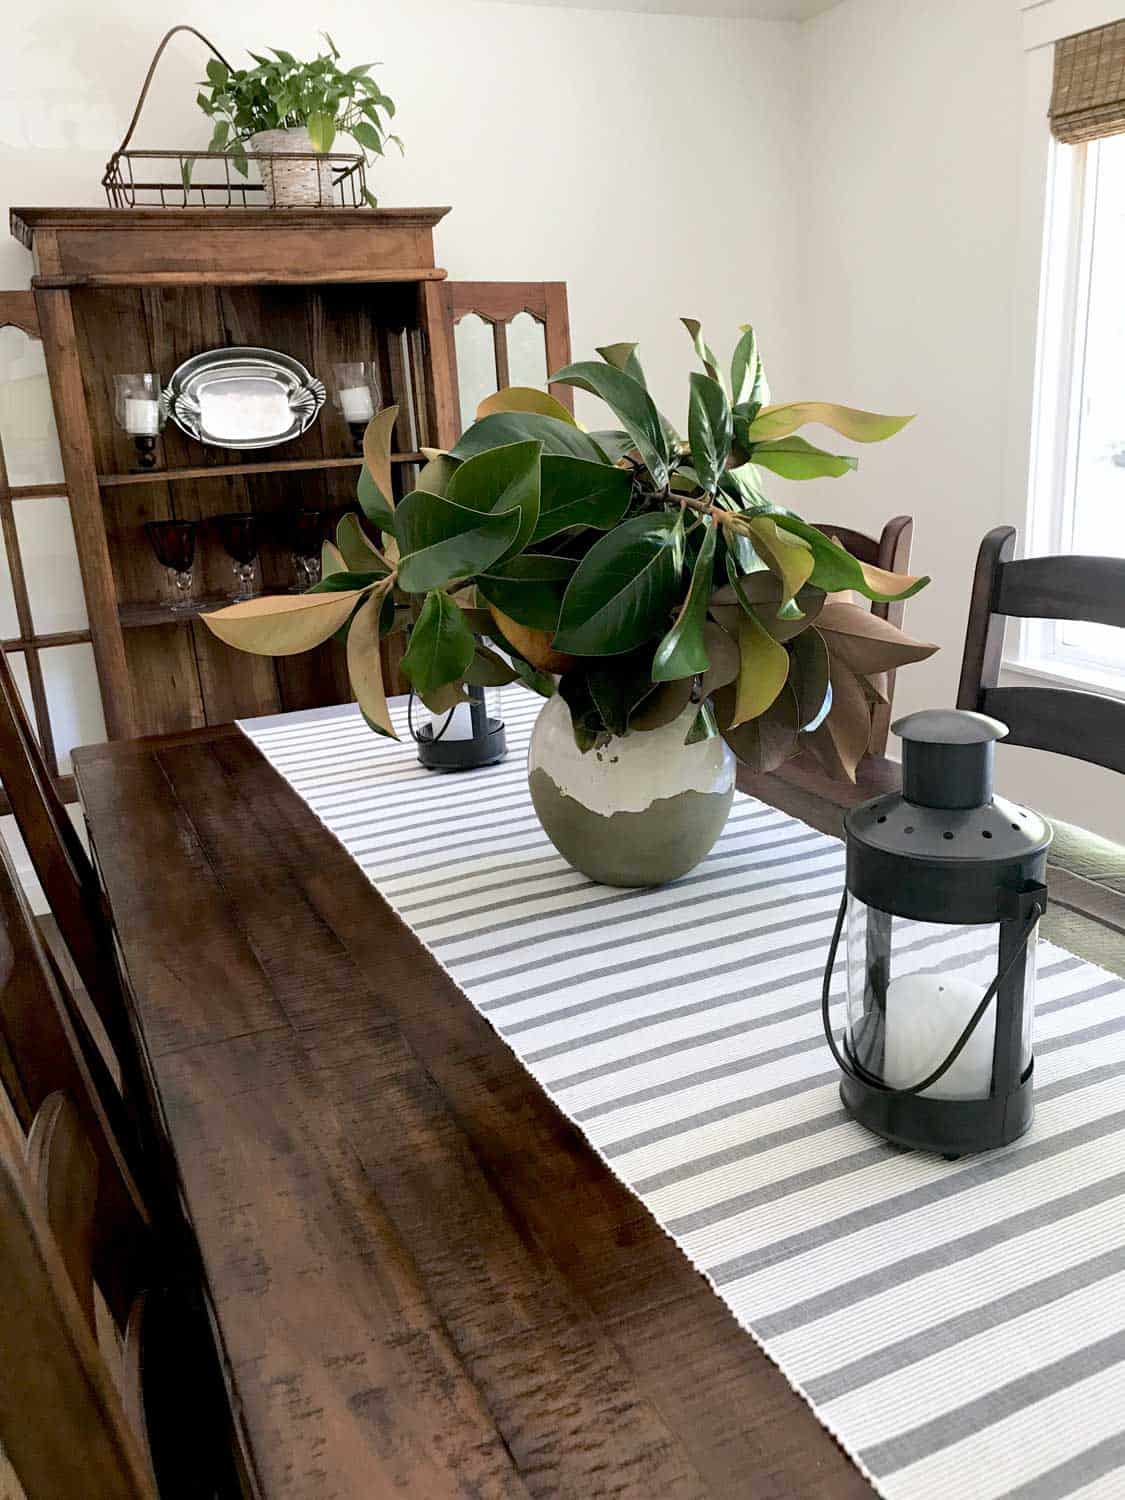 18 Décor Tips For Your Dining Table Everyday   Classic Casual Home